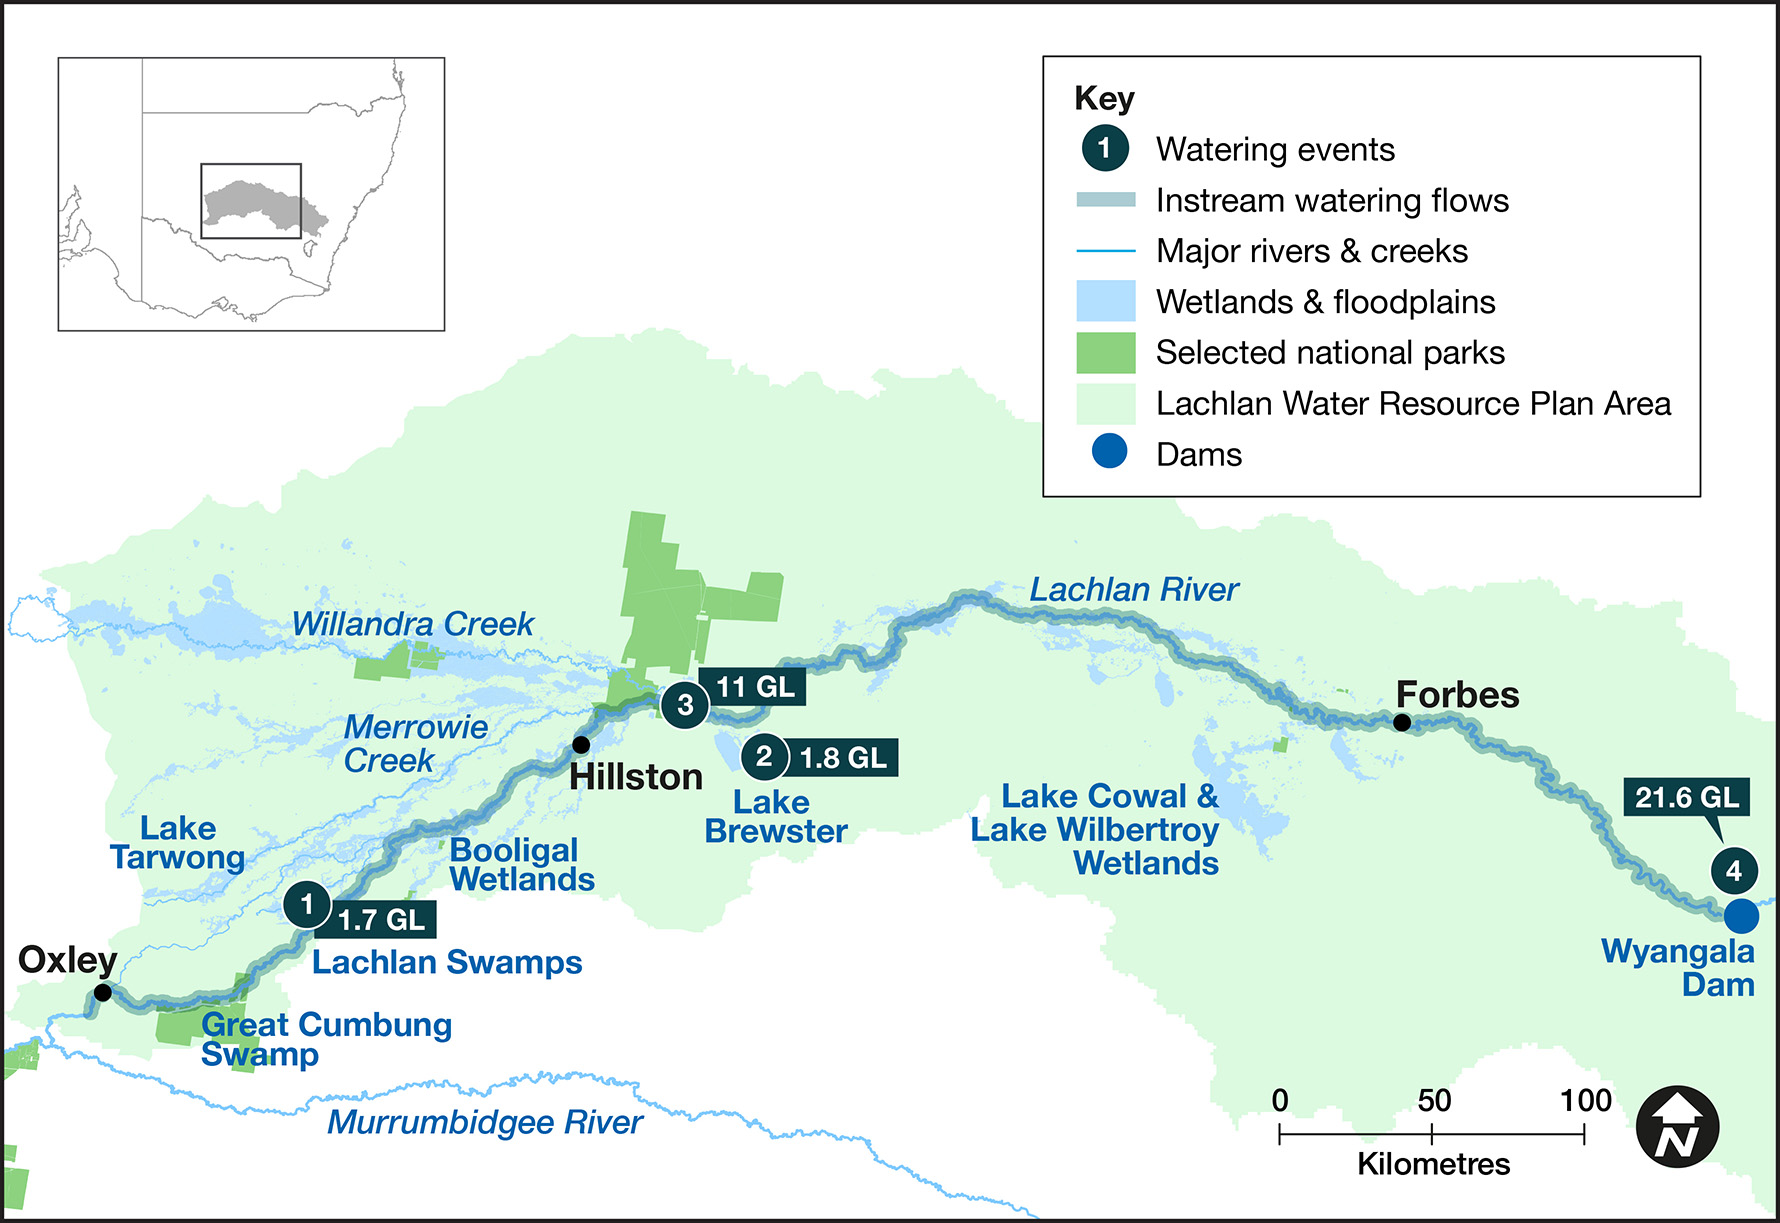 Map of sites in the Lachlan catchment where environmental water was delivered in the 2022-23 water year, with corresponding volumes.